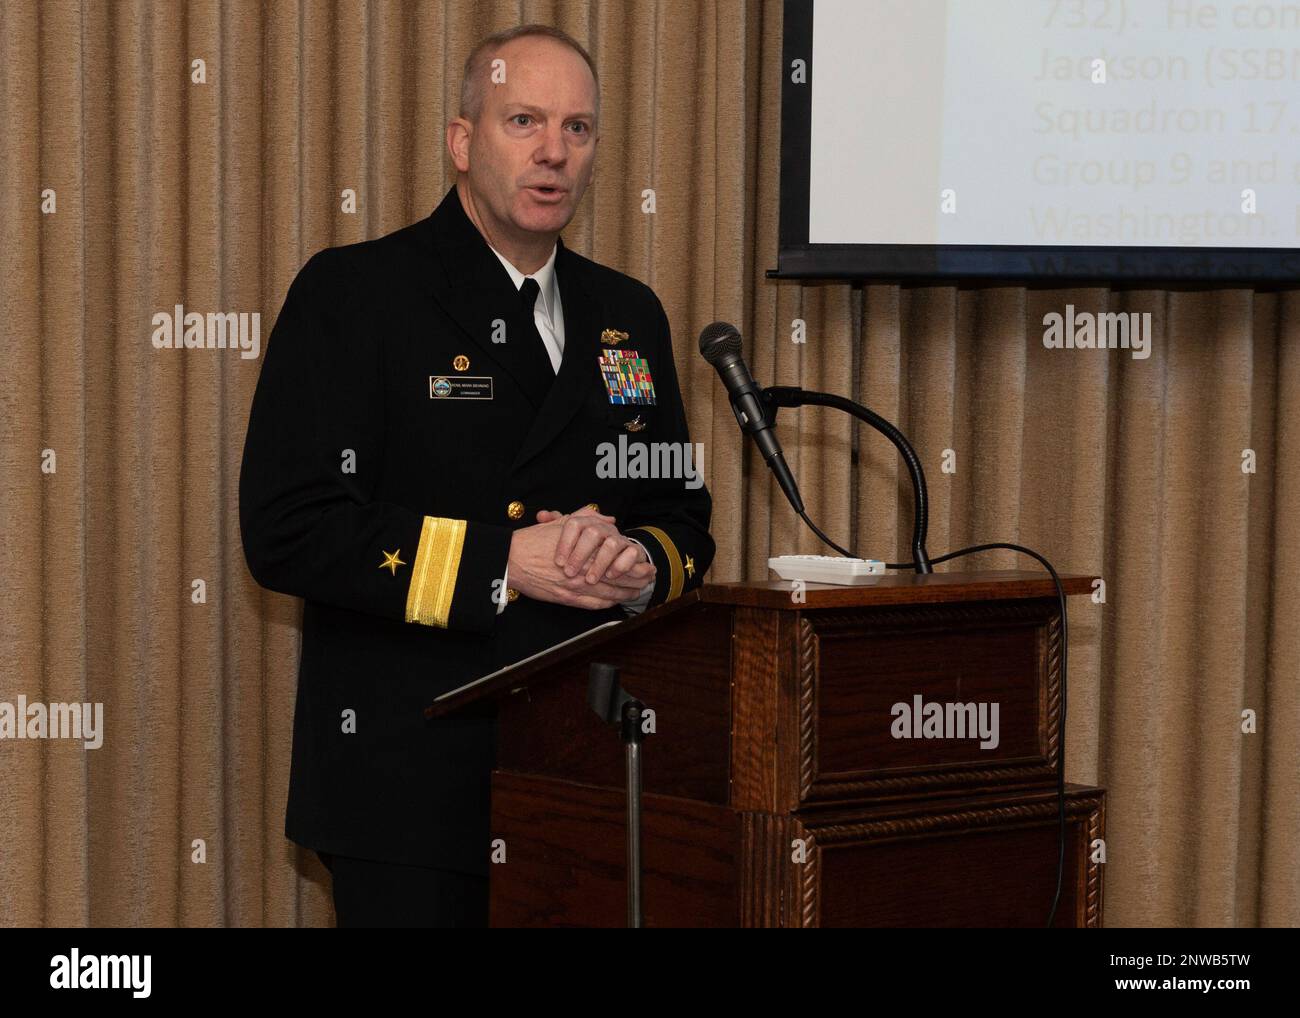 230218-N-ED185-1016  BREMERTON, Wash. (Feb. 18, 2023) Rear Adm. Mark Behning, commander, Submarine Group 9, speaks during the Junior Science and Humanities Symposium (JSHS) in Bremerton, Washington, February 18, 2023. The JSHS is a Department of Defense sponsored science, technology, engineering and mathematics (STEM) program that encourages high school students to conduct original research in the fields of STEM. Stock Photo